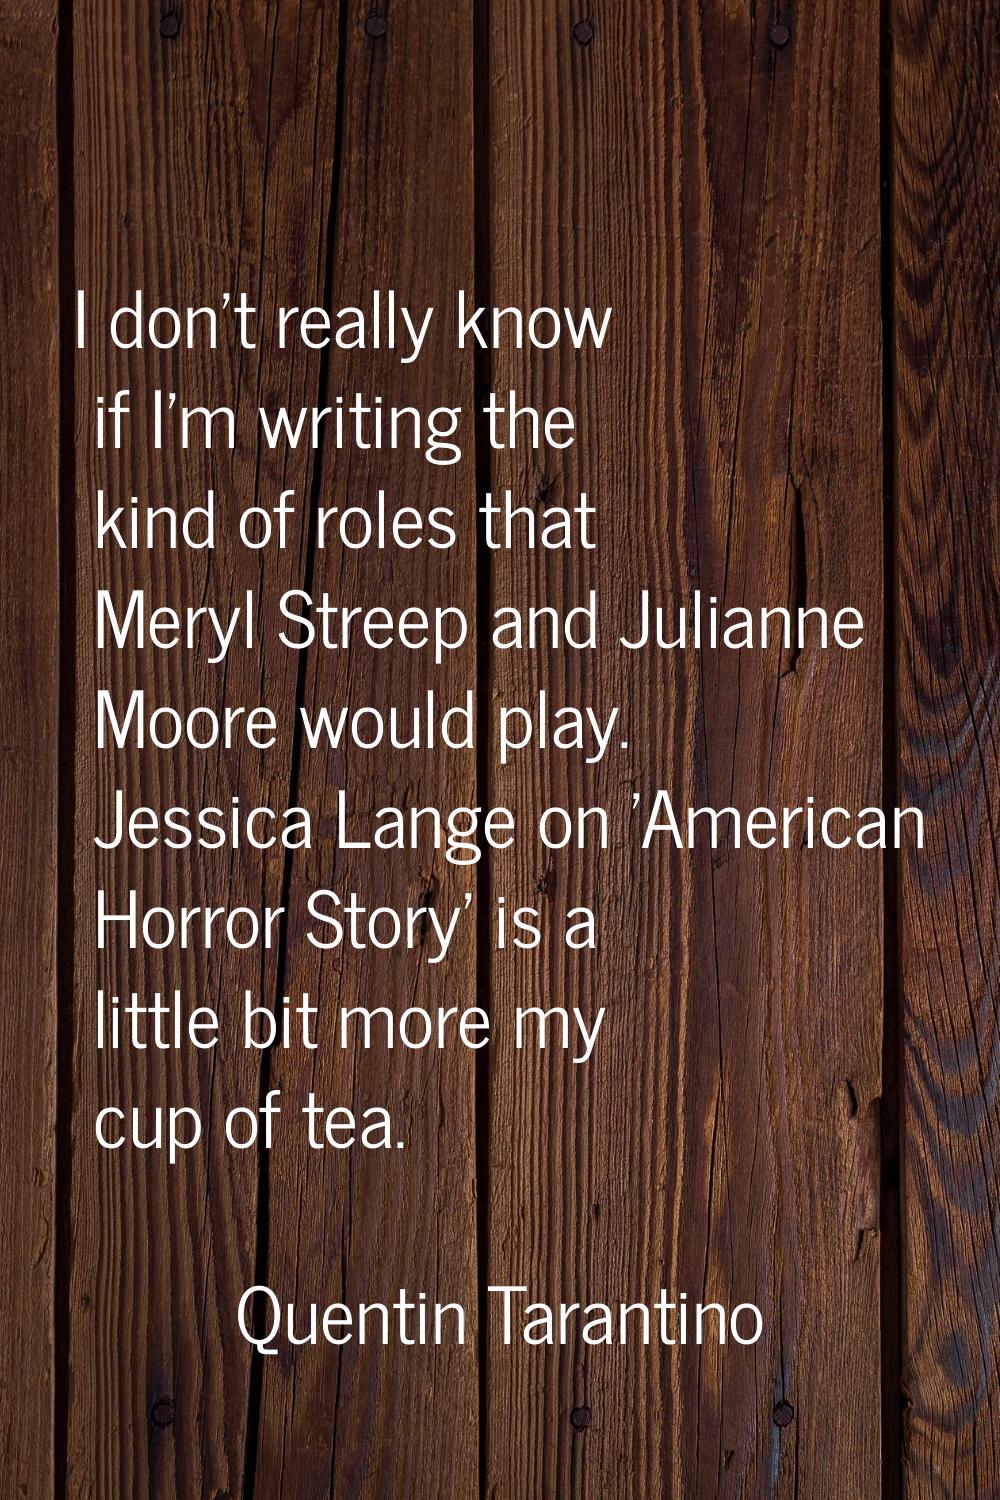 I don't really know if I'm writing the kind of roles that Meryl Streep and Julianne Moore would pla